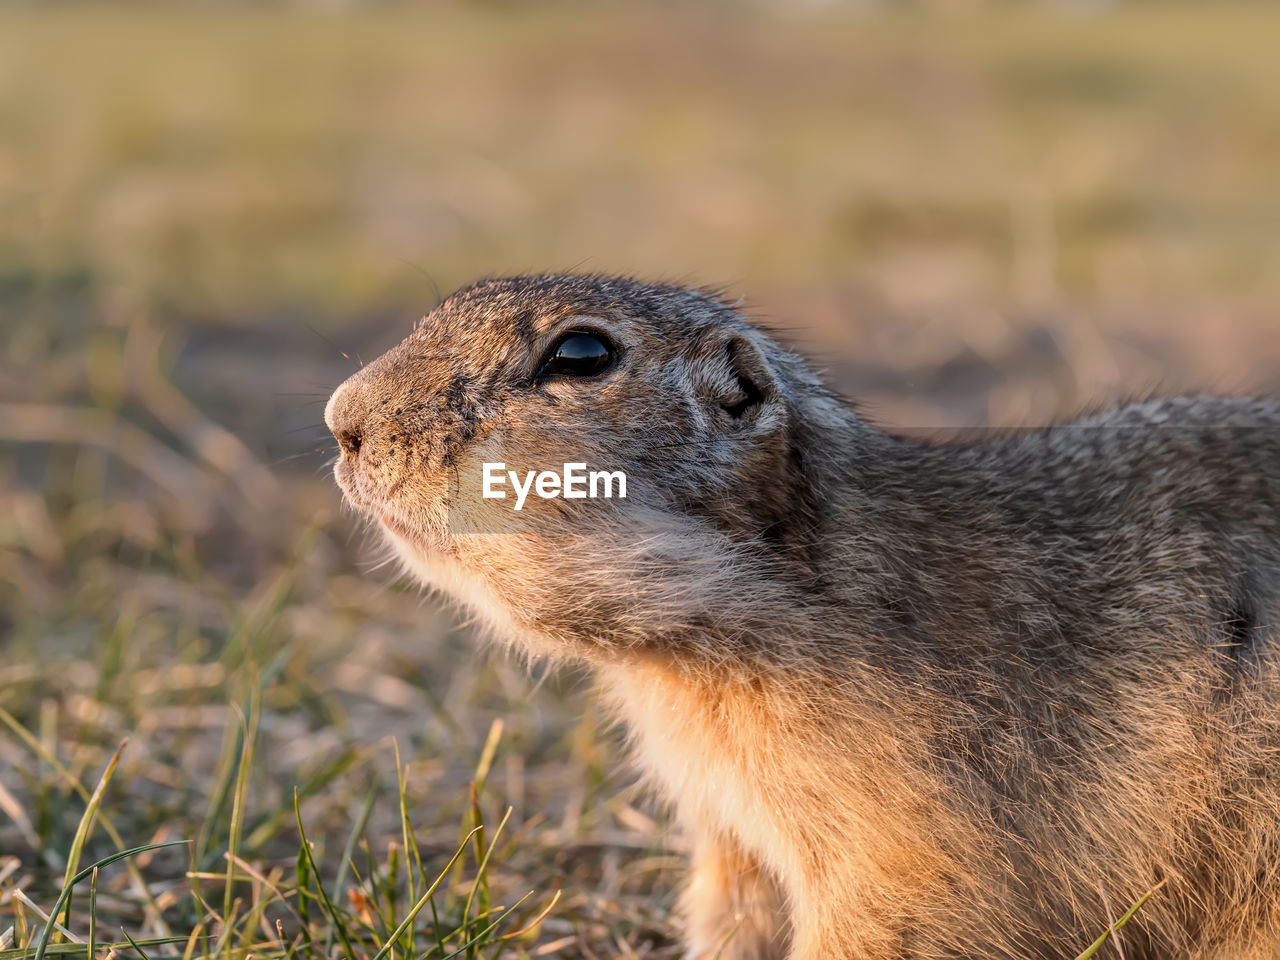 animal, animal themes, animal wildlife, one animal, wildlife, mammal, squirrel, whiskers, prairie dog, rodent, no people, nature, side view, close-up, grass, outdoors, focus on foreground, profile view, day, portrait